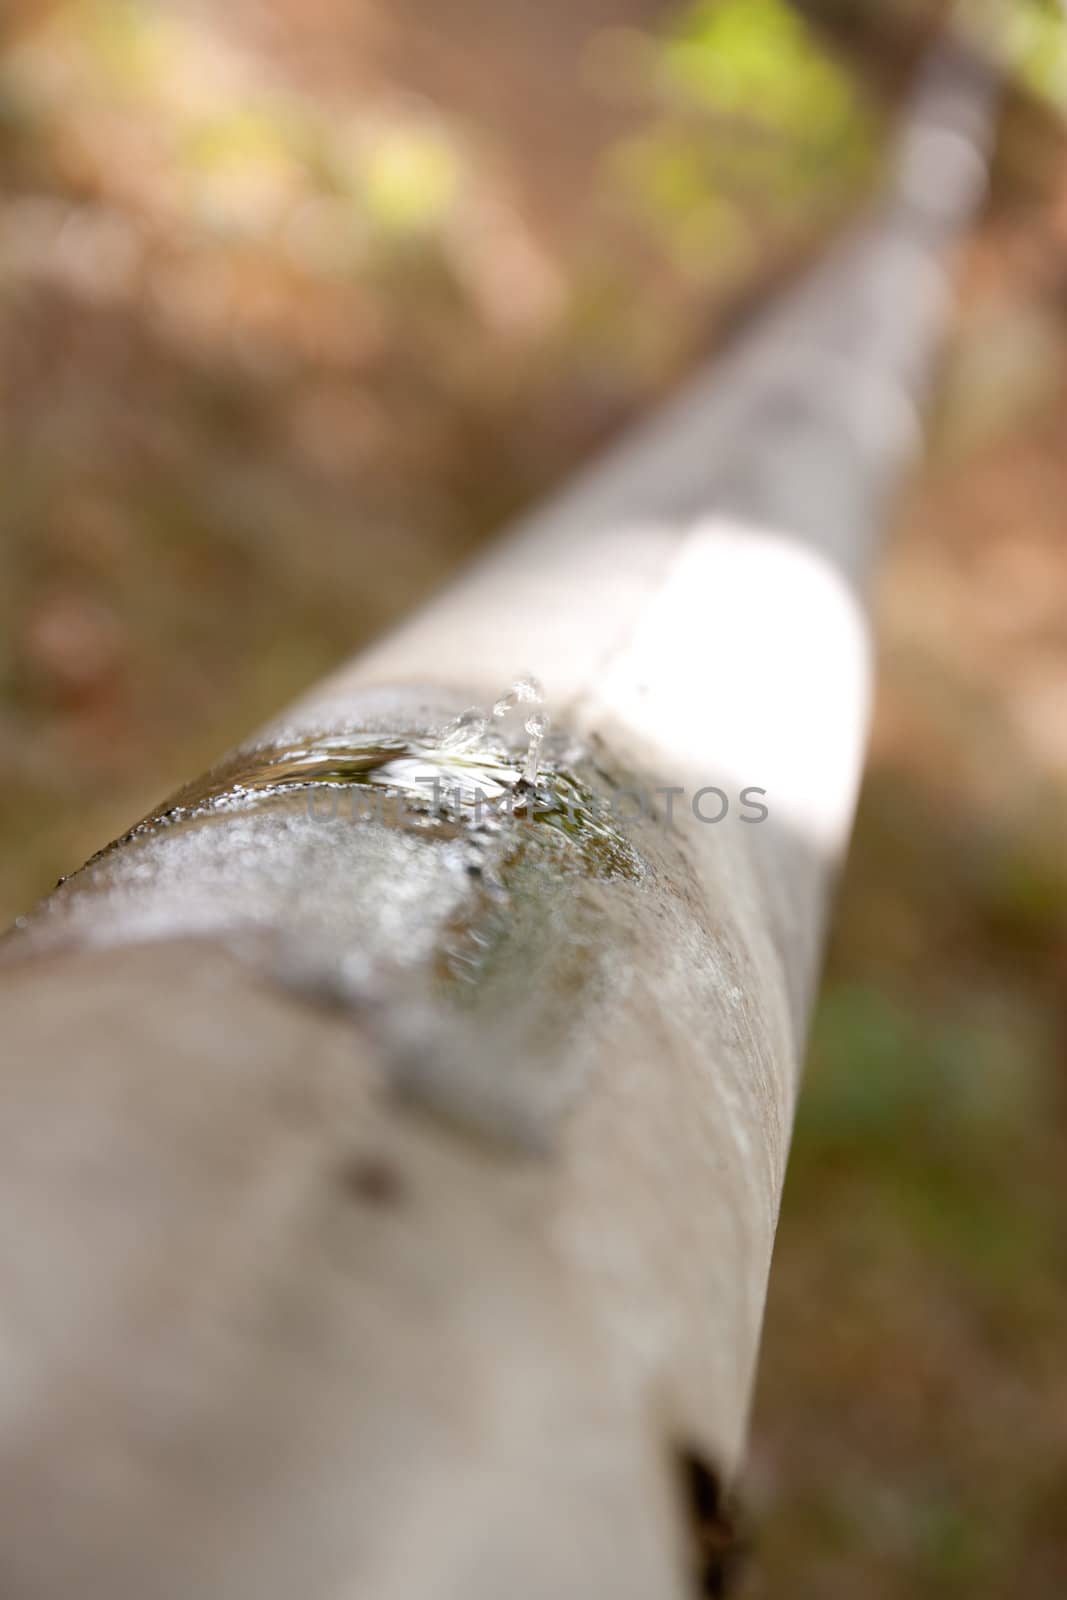 Leak of water from a crack in an old rusty pipe 